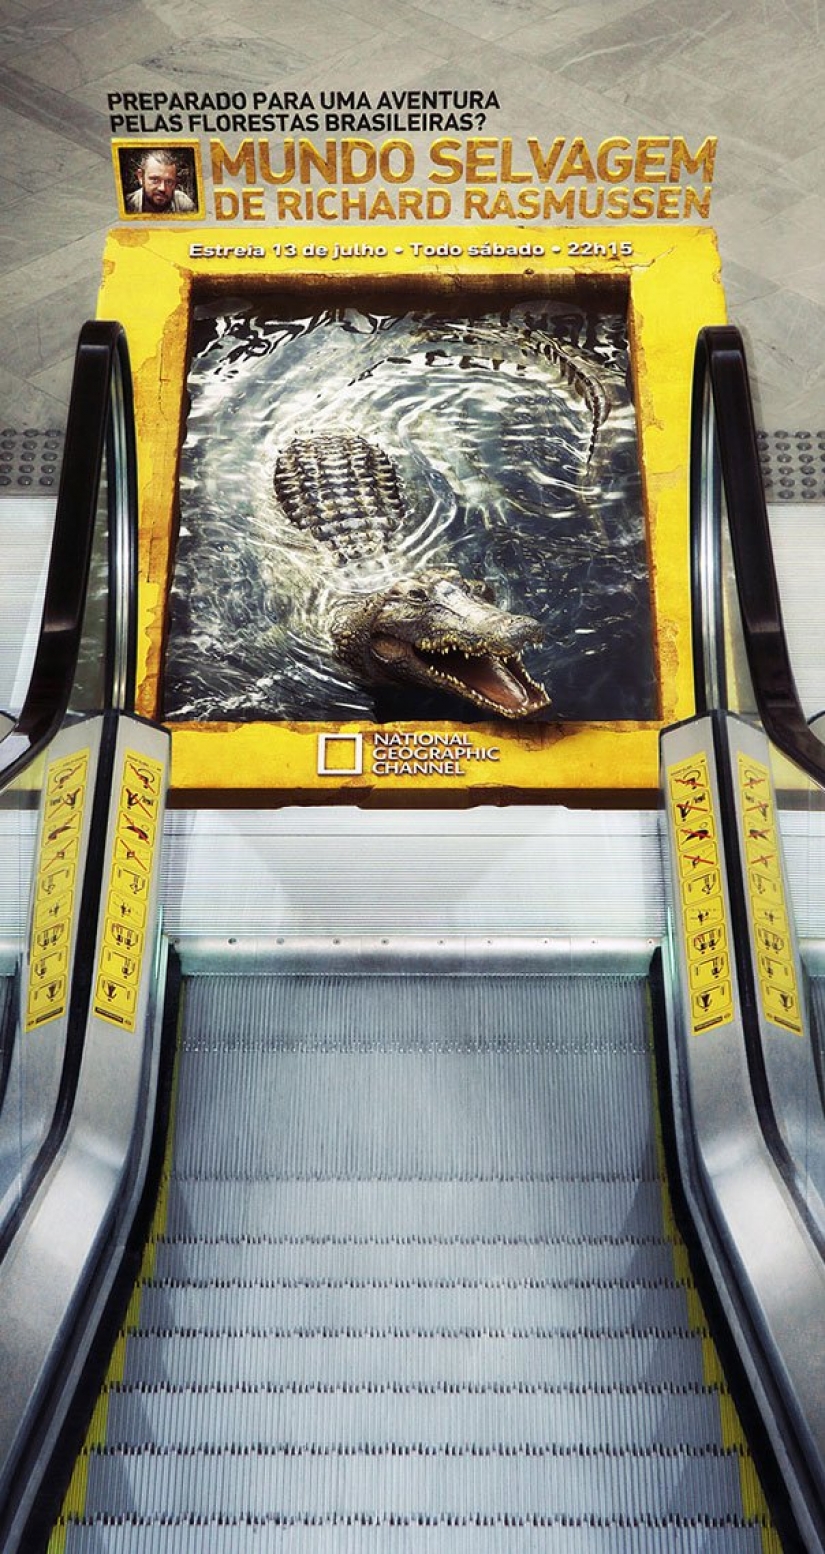 25 examples of brilliant ads, perfectly inscribed in the urban jungle